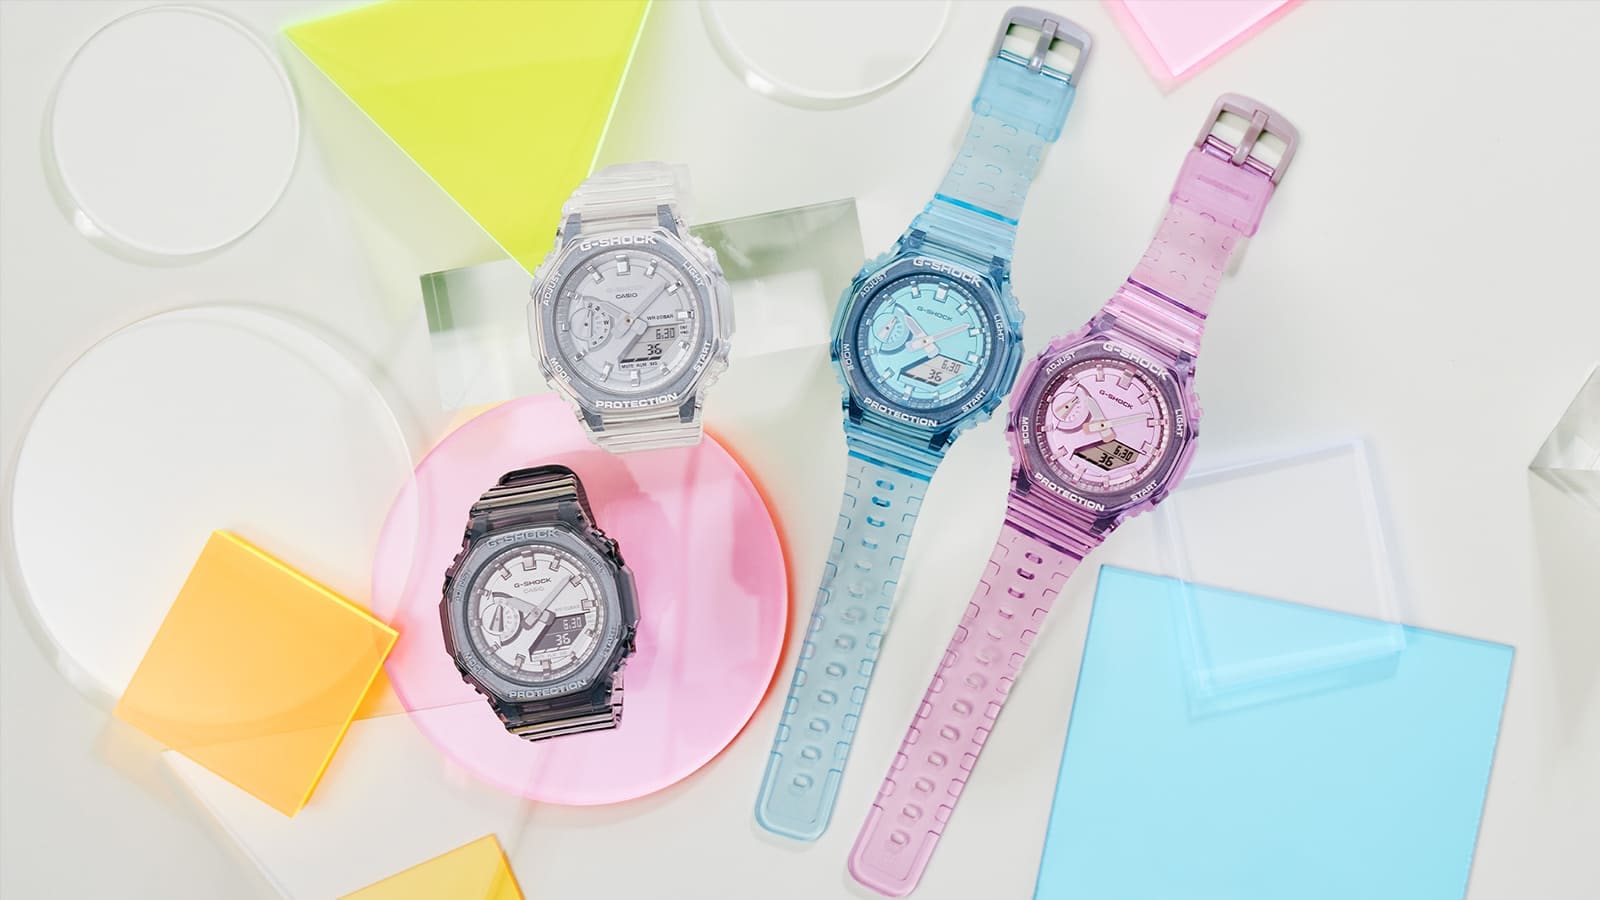 G-SHOCK GMAS2100SK series watches on a background with clear and translucent shaped materials